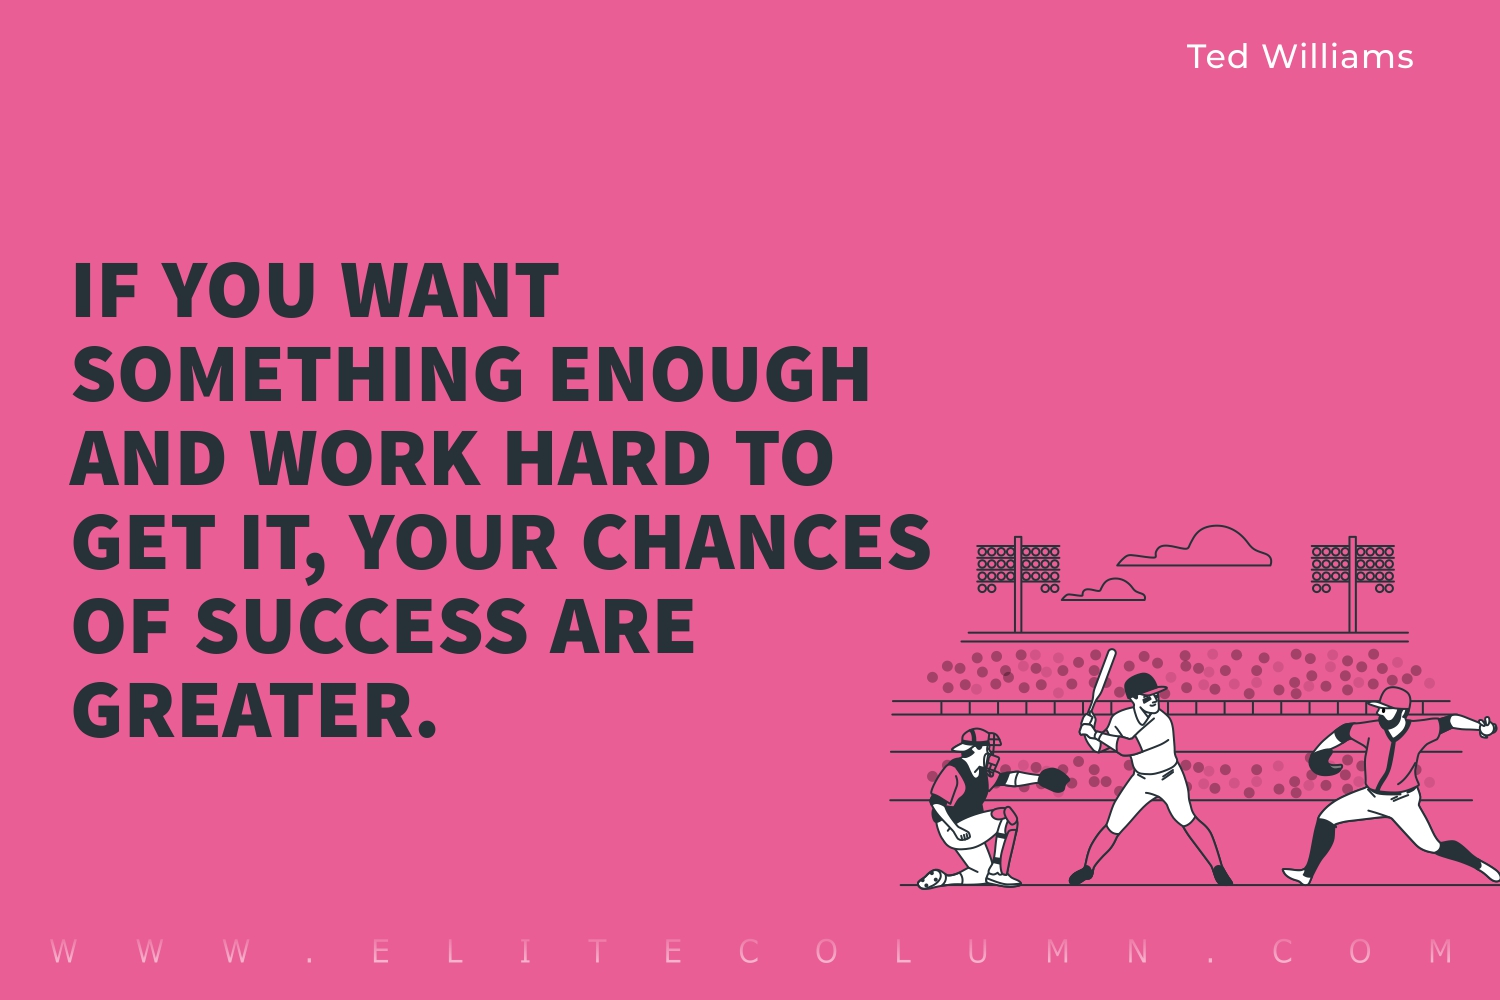 baseball quotes about working hard